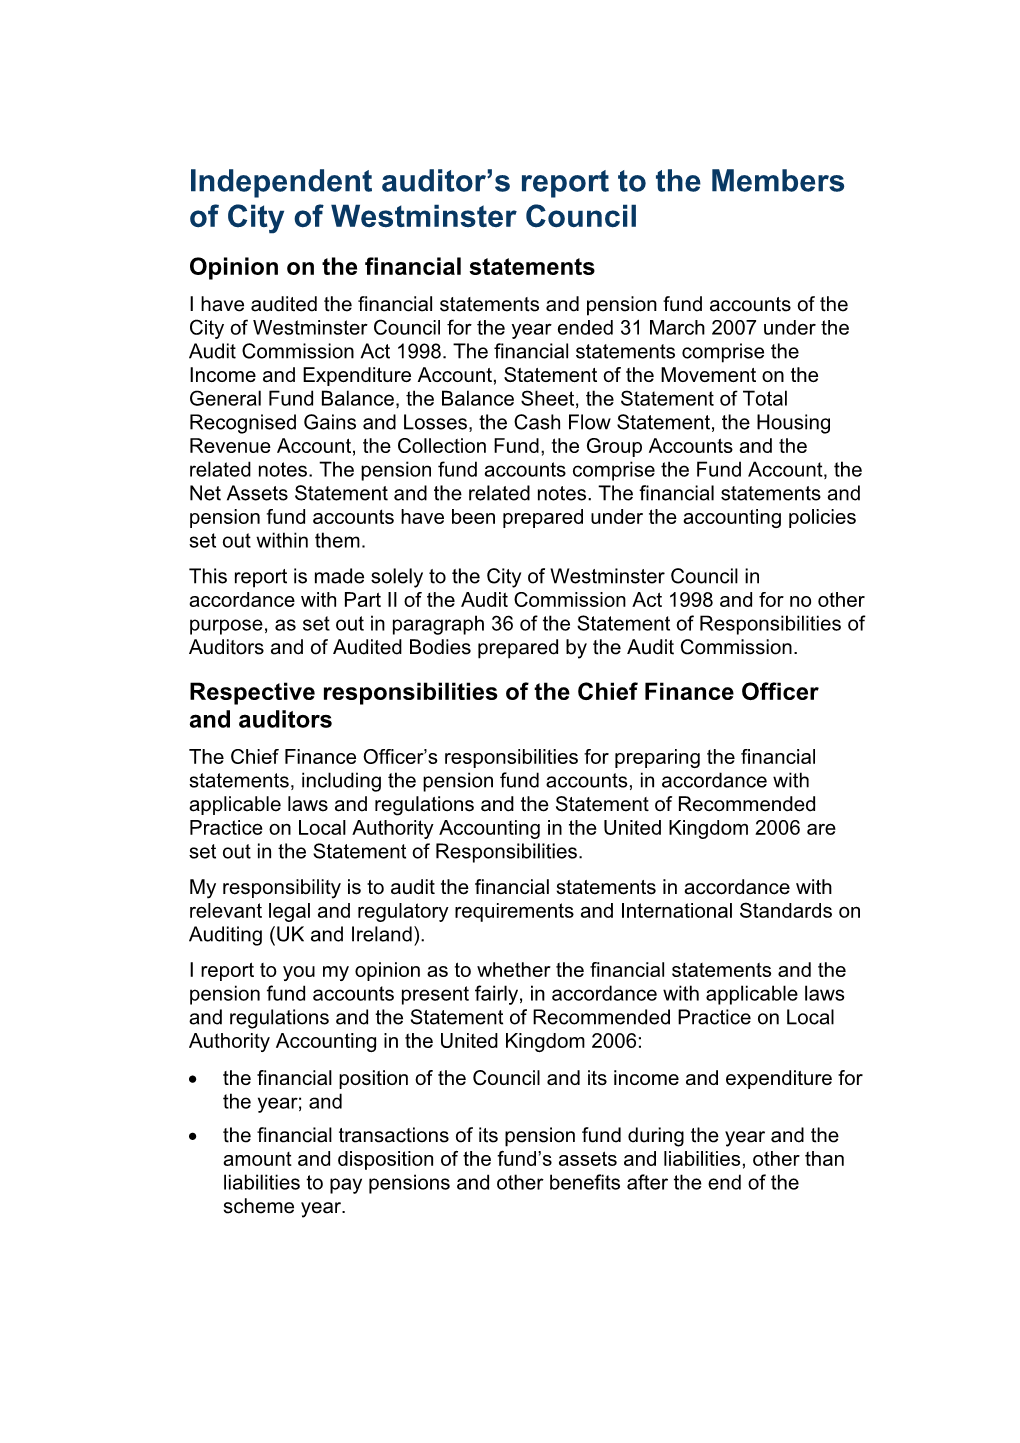 Independent Auditor's Report to the Members of City of Westminster